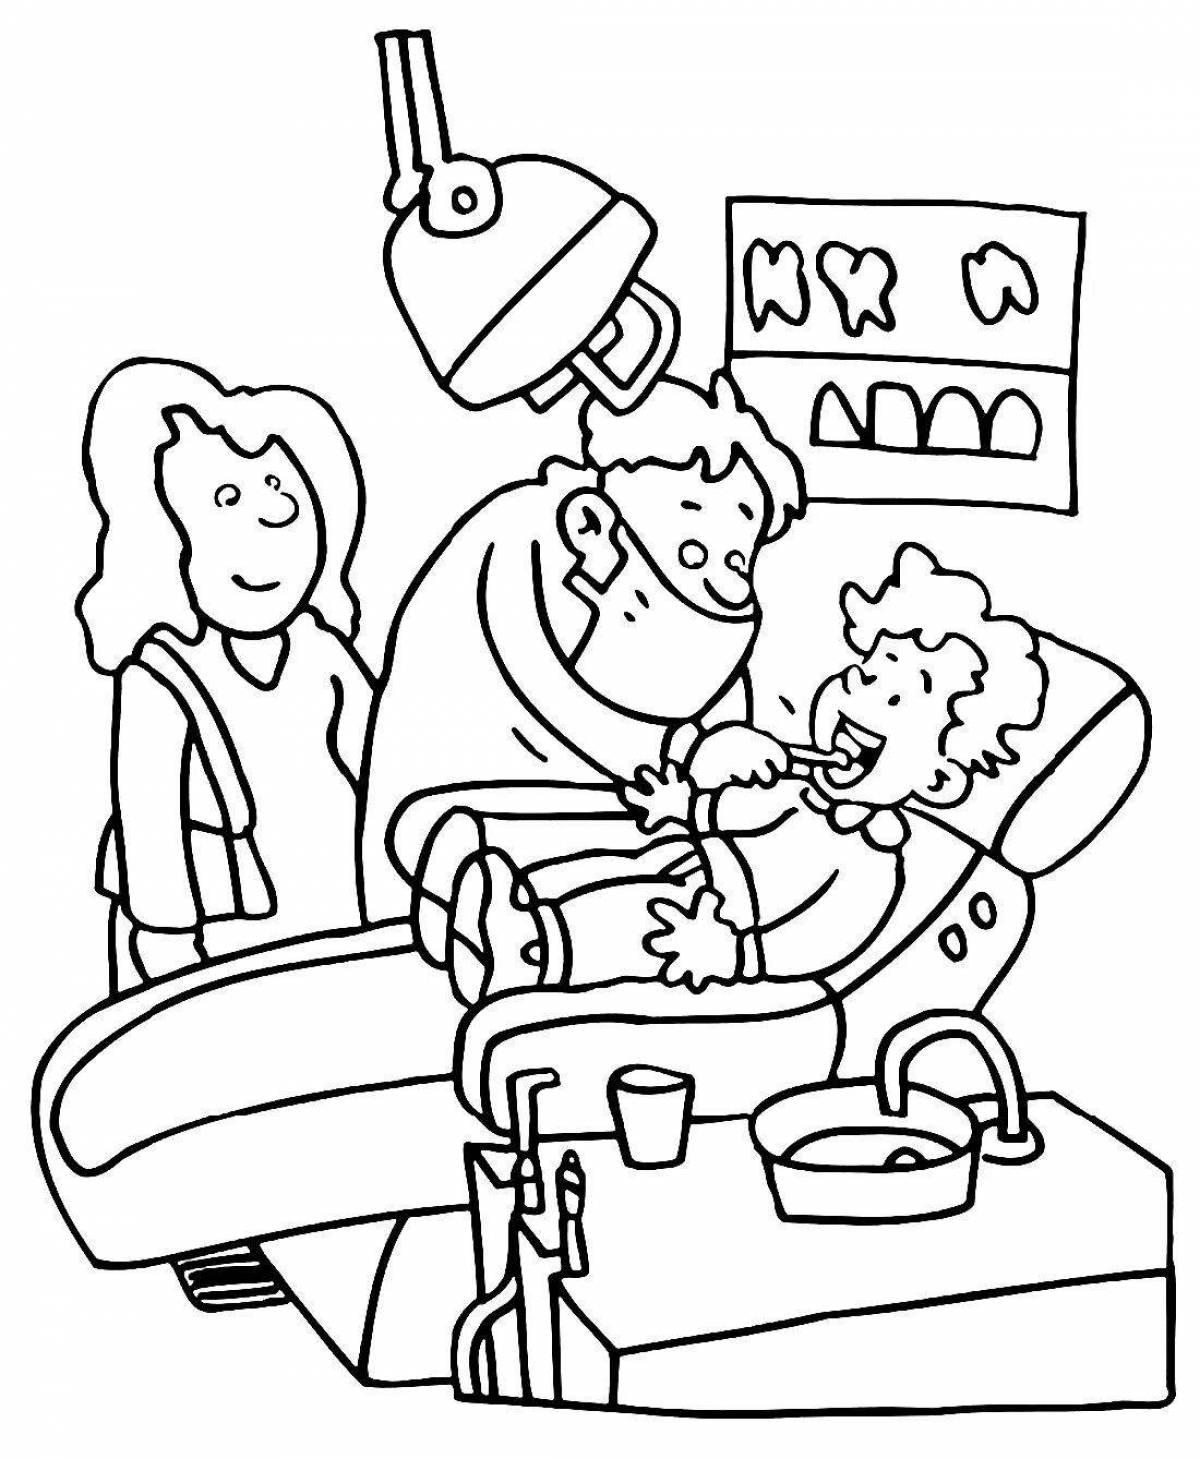 Awesome class 1 job coloring pages